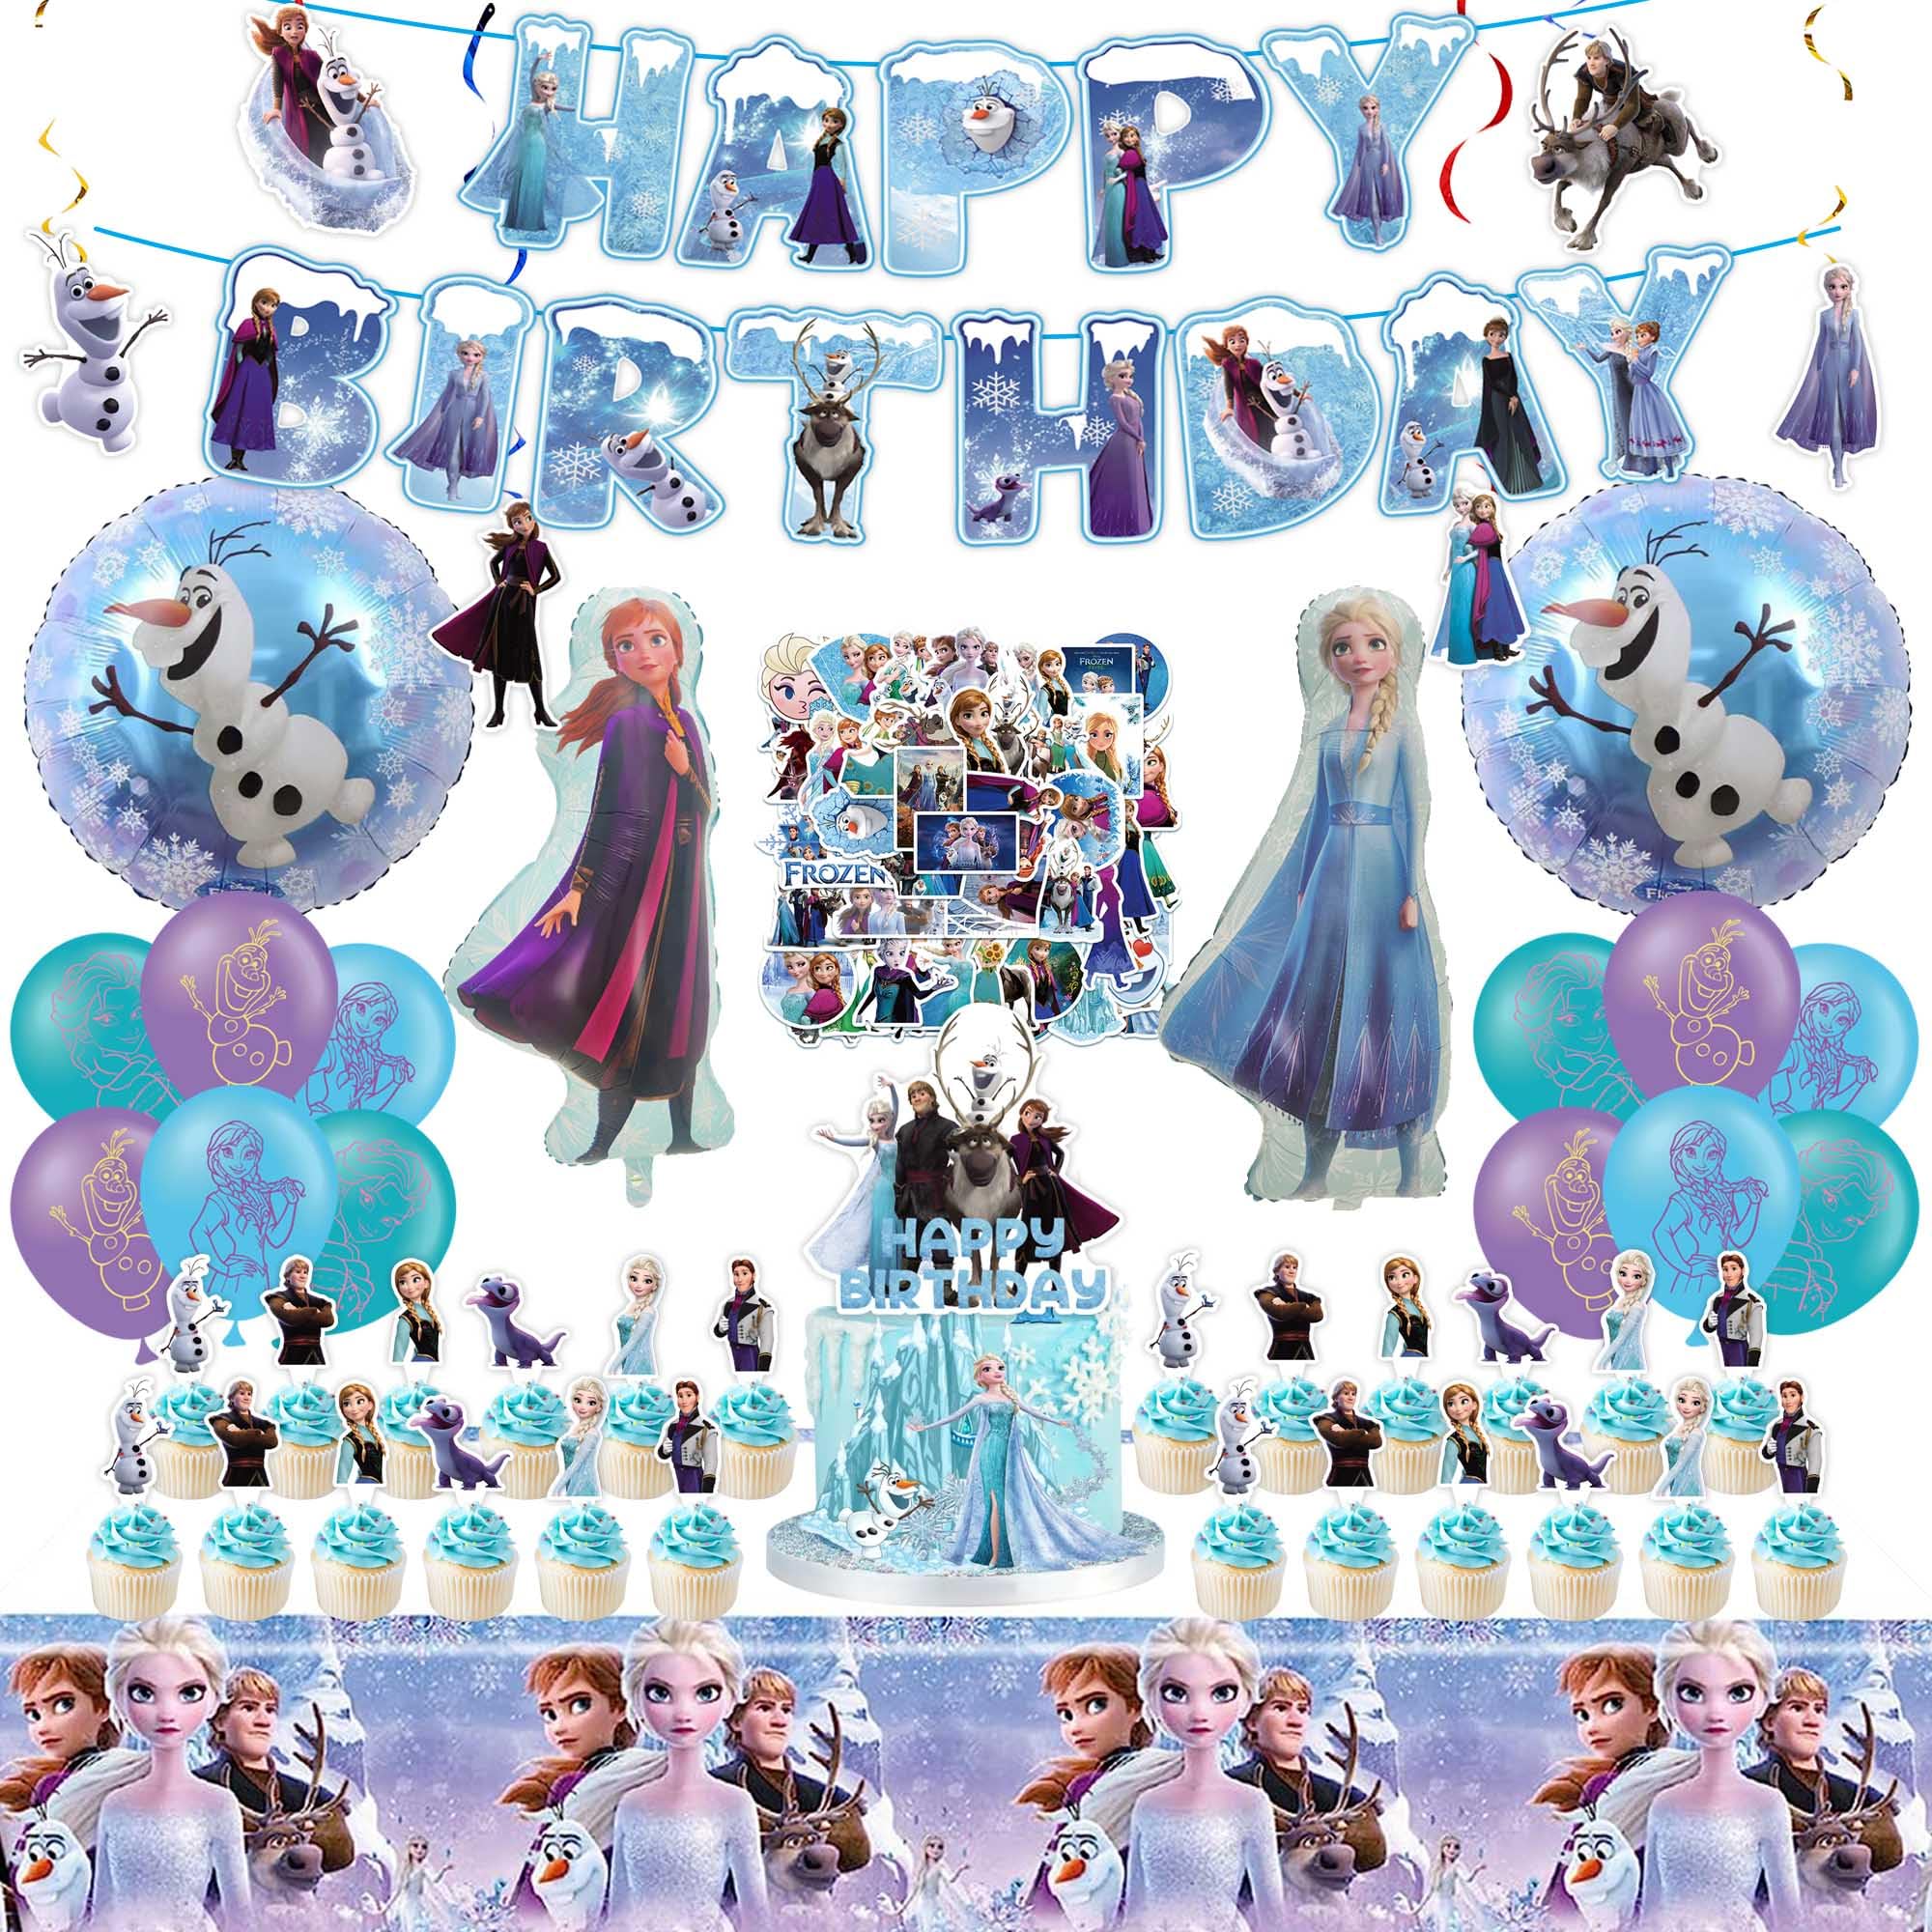 Frozen Birthday Party Supplies for Girls, Frozen Birthday Party Decorations Include Banner, Frozen Balloons, Hanging Swirls, Stickers, Cupcake Toppers, Tablecloth